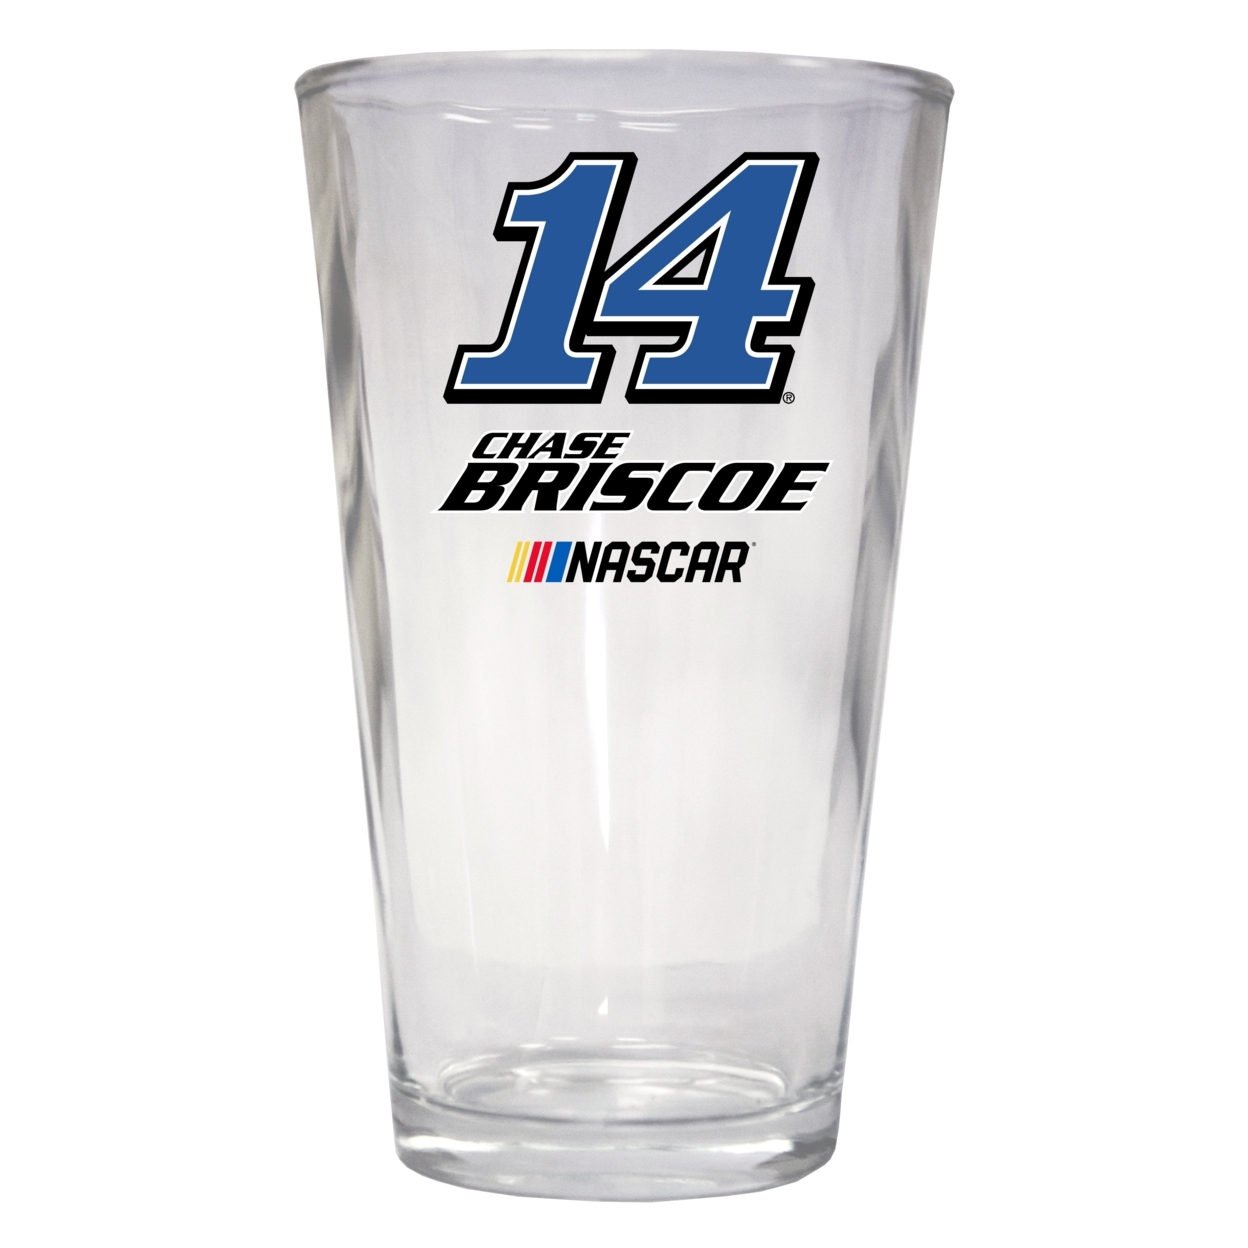 Chase Briscoe #14 NASCAR Cup Series 16 Oz Pint Glass